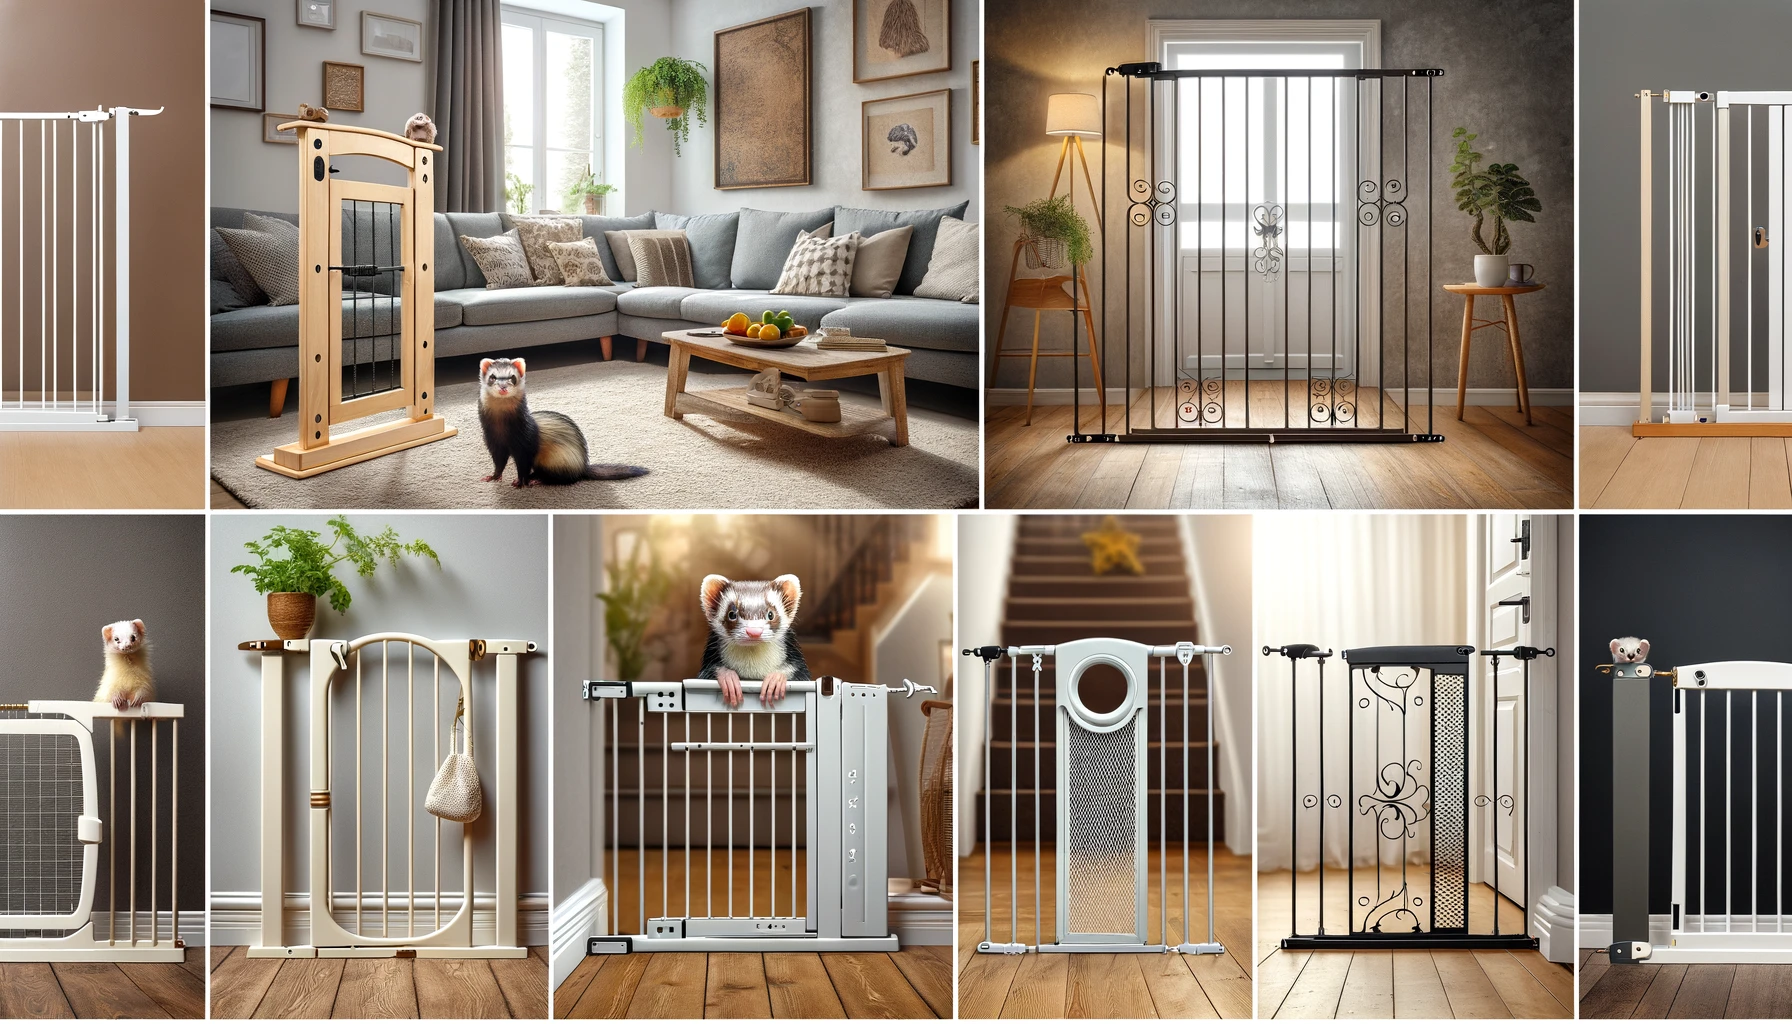 Best Baby Gate For Ferrets